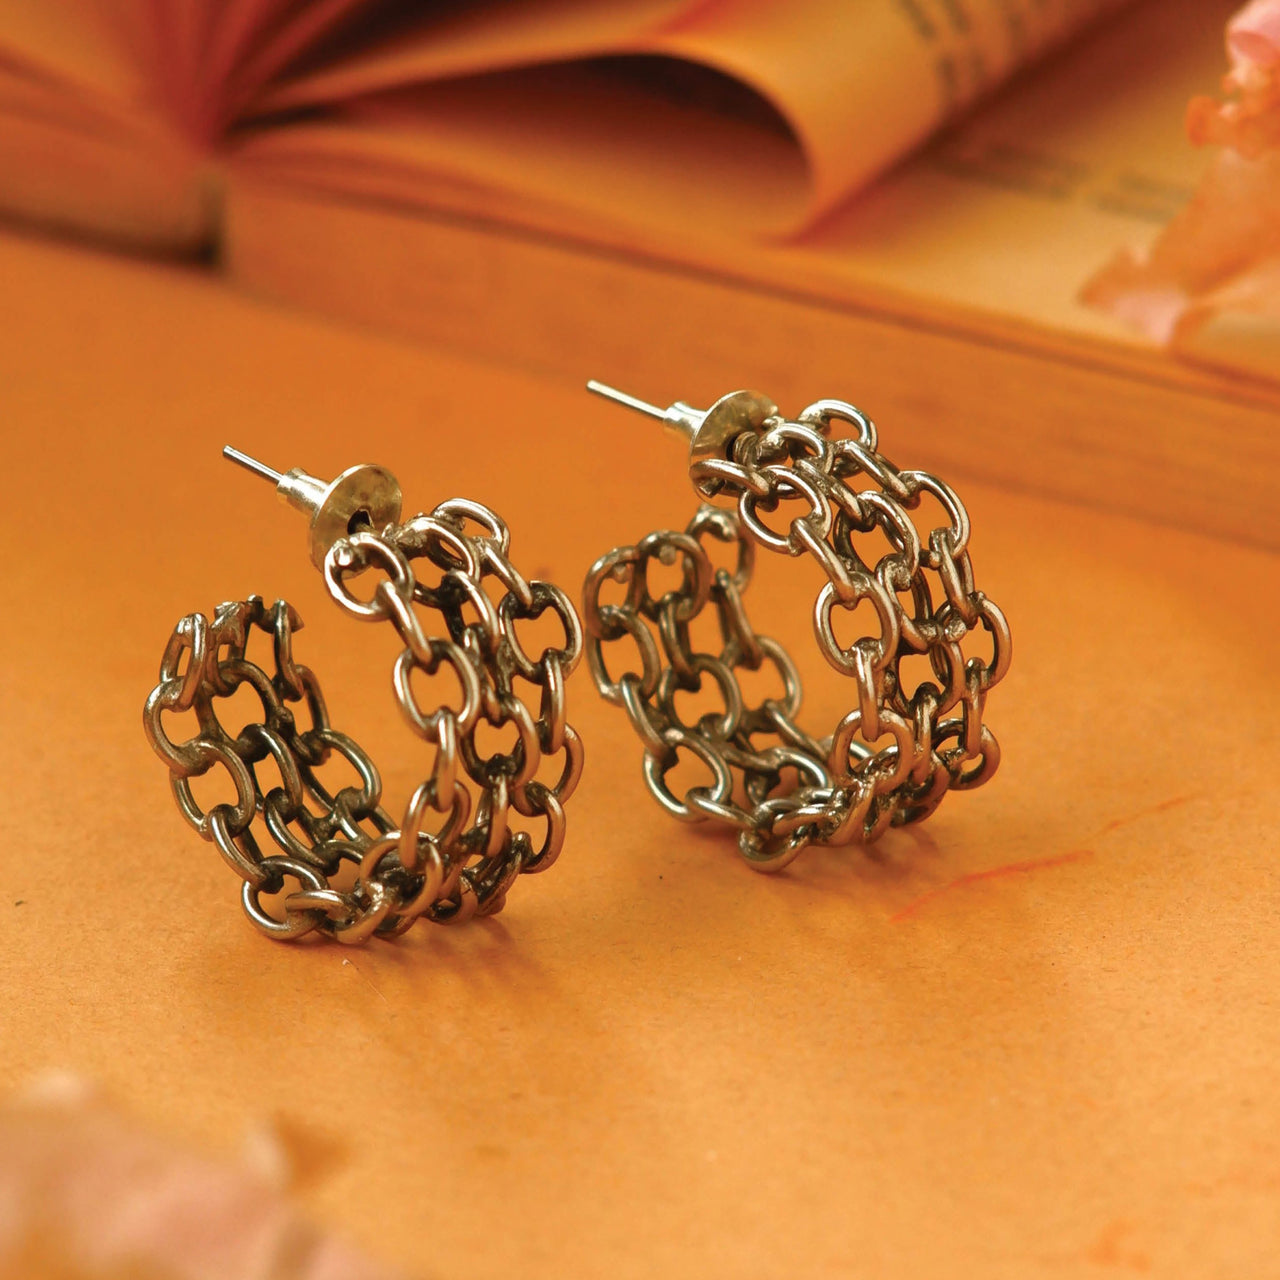 3 layer chain earrings - Silver plated